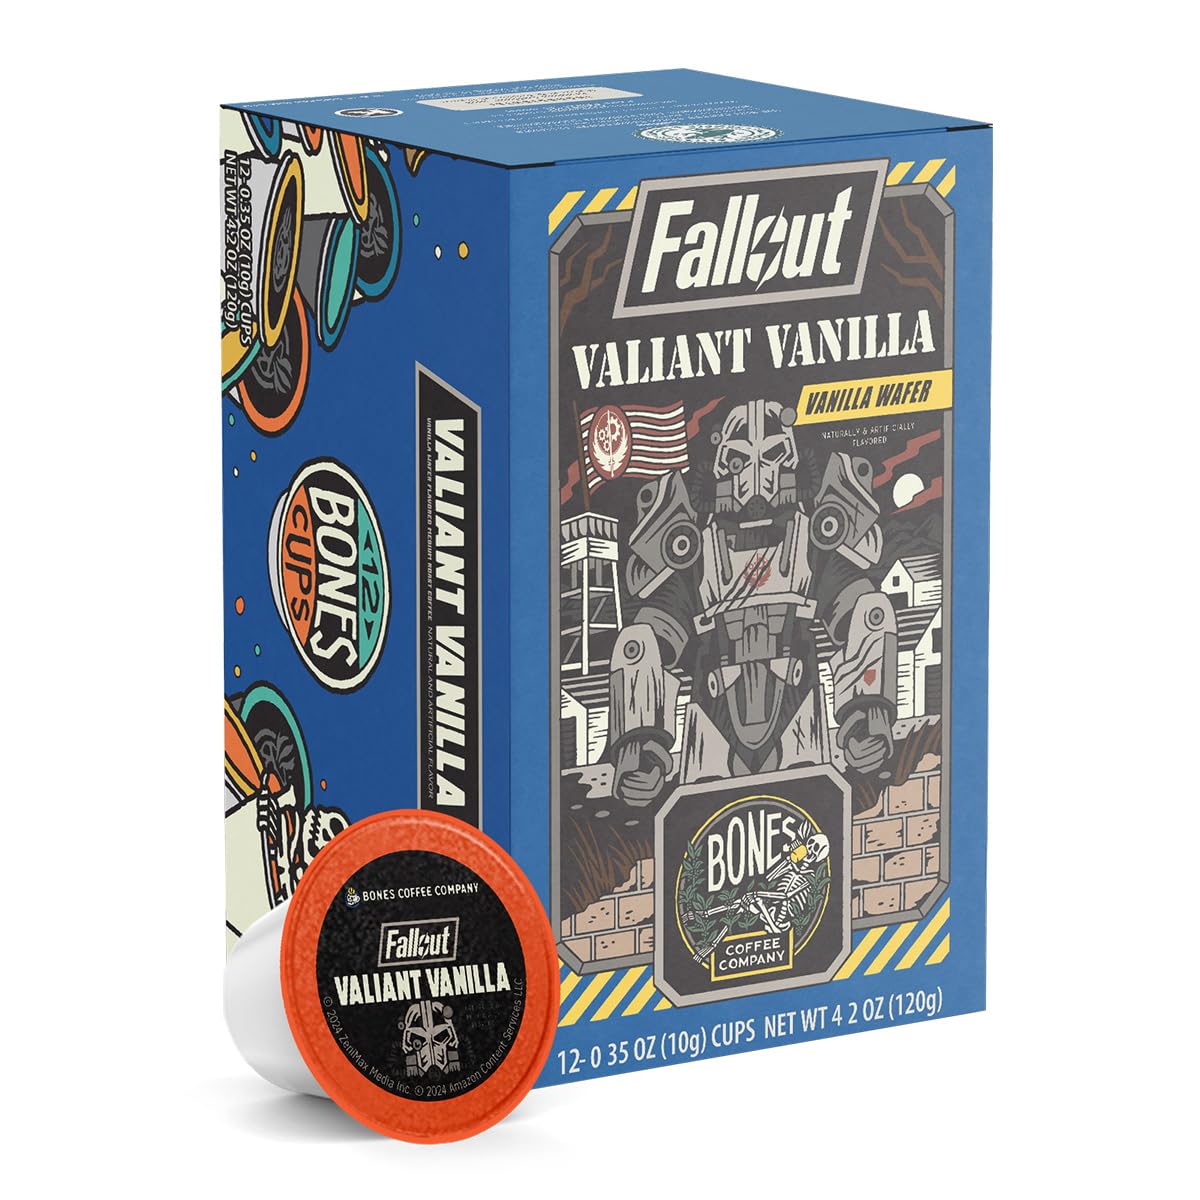 Bones Coffee Company Flavored Coffee Bones Cups Valiant Vanilla Flavored Pods Vanilla Wafer Flavor | 12ct Single-Serve Coffee Pods Inspired From Fallout Series